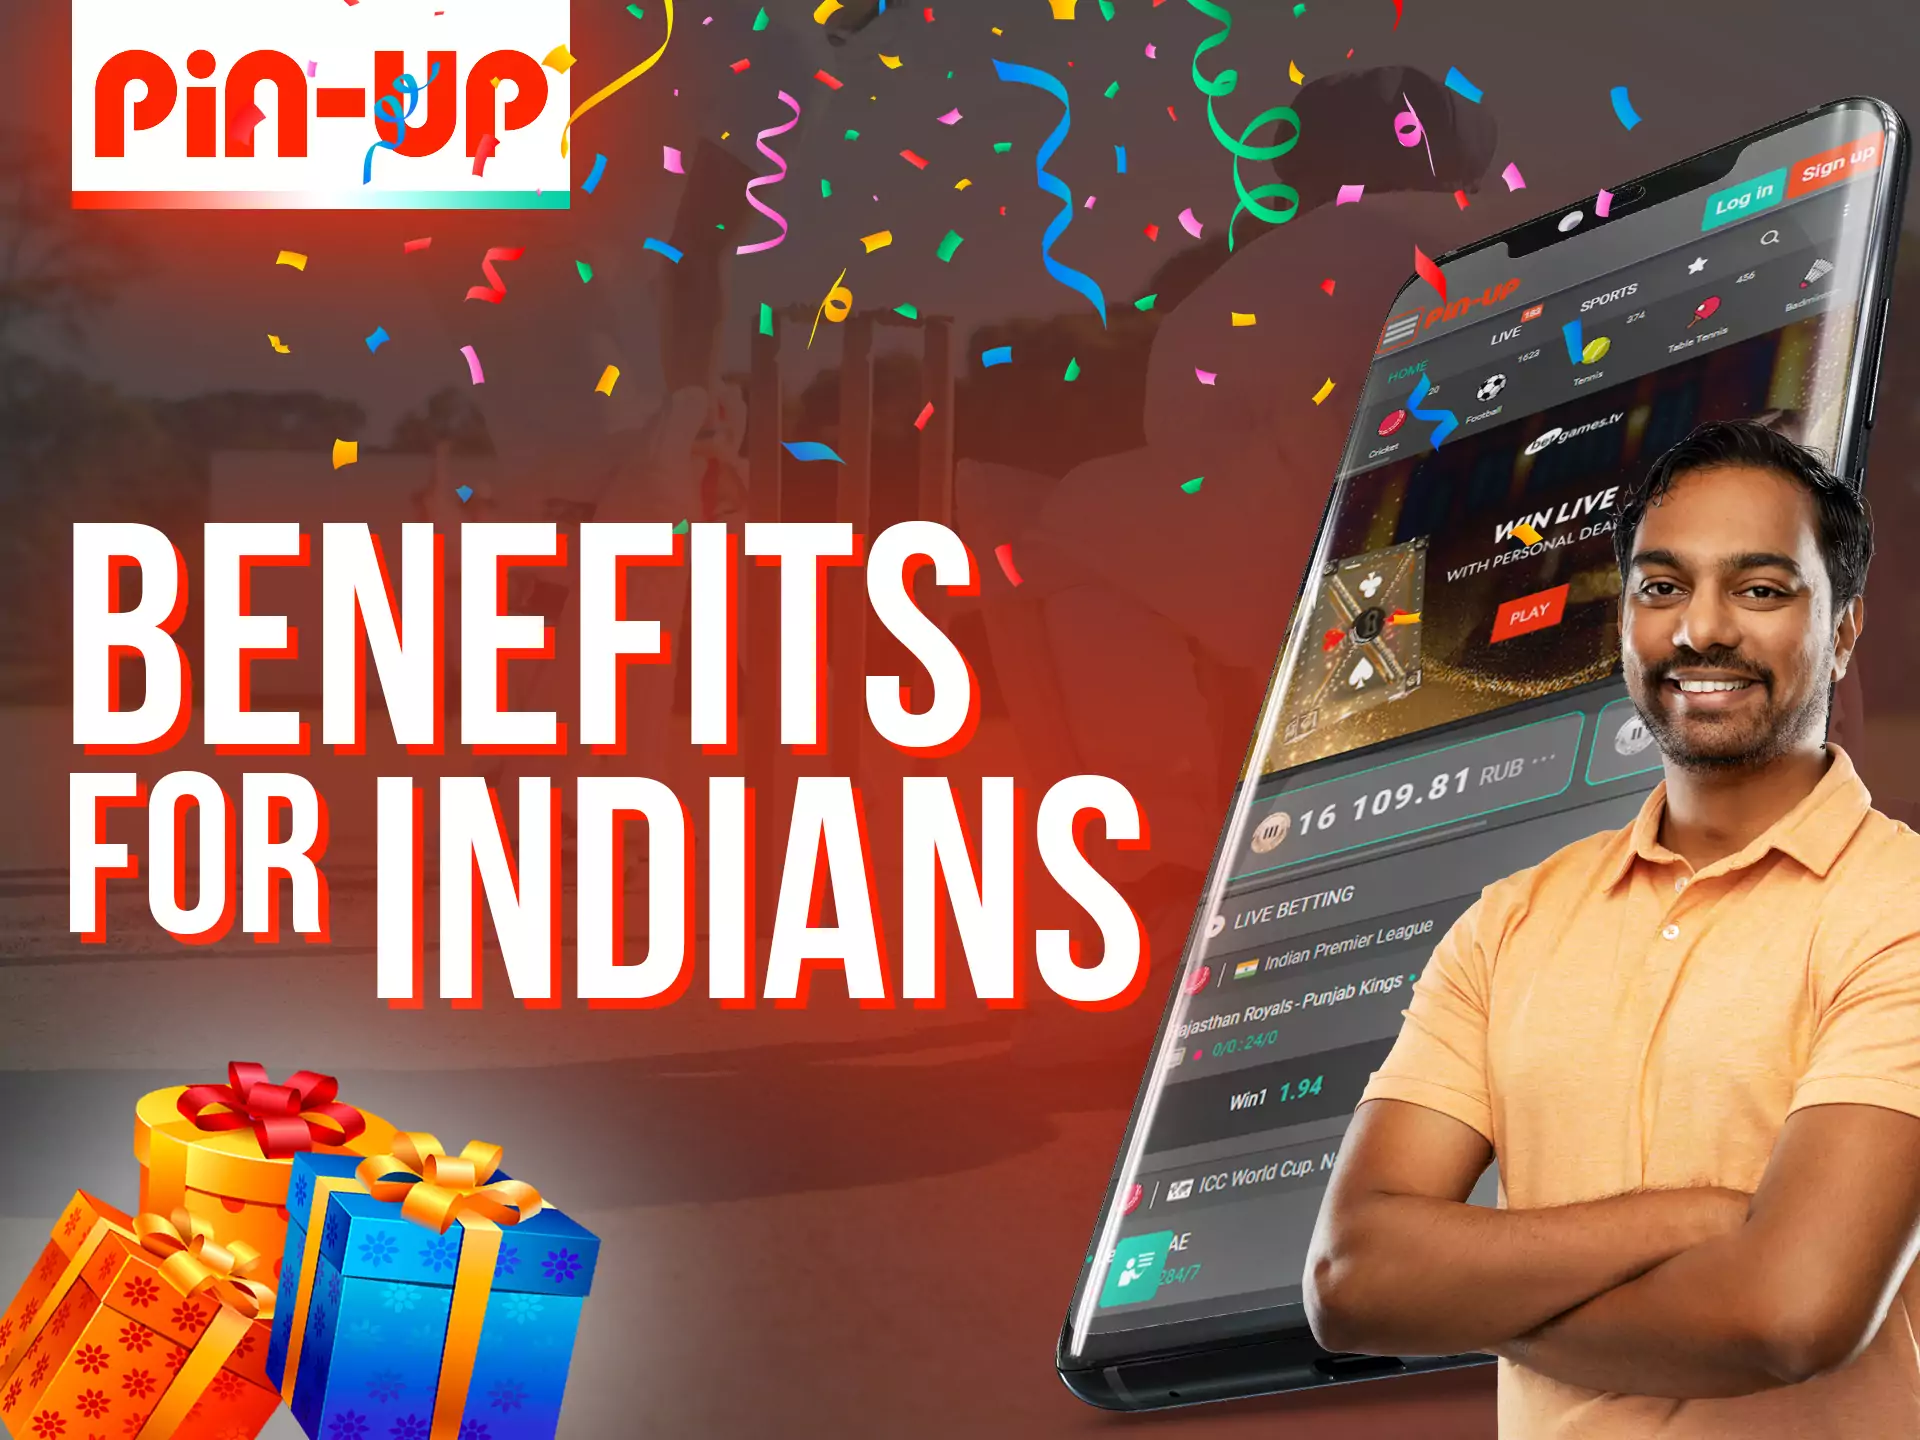 The Pin-Up app gives players from India special benefits and bonuses.